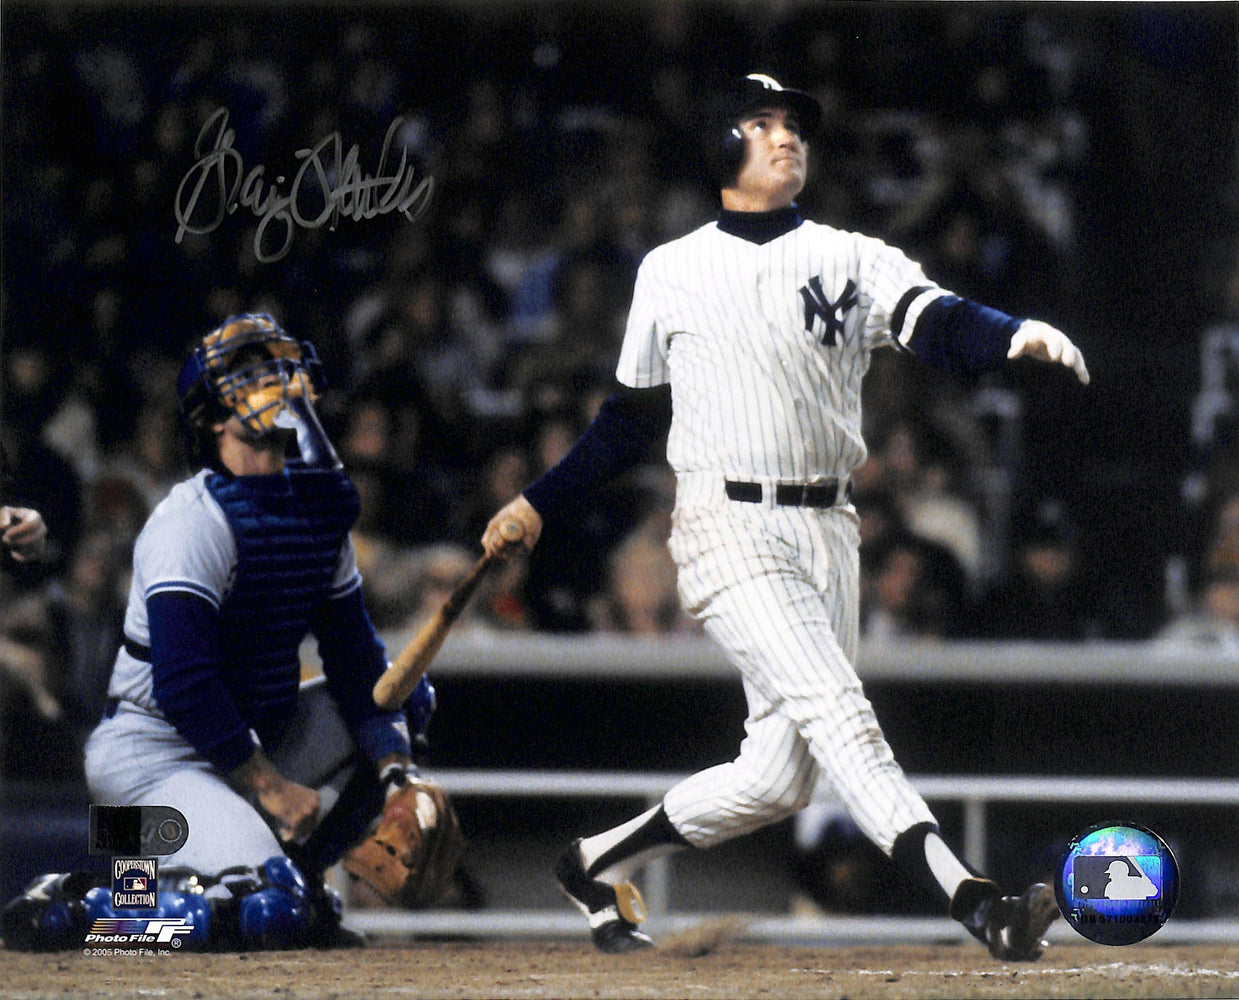 graig nettles signed 8x10 photo aiv top view